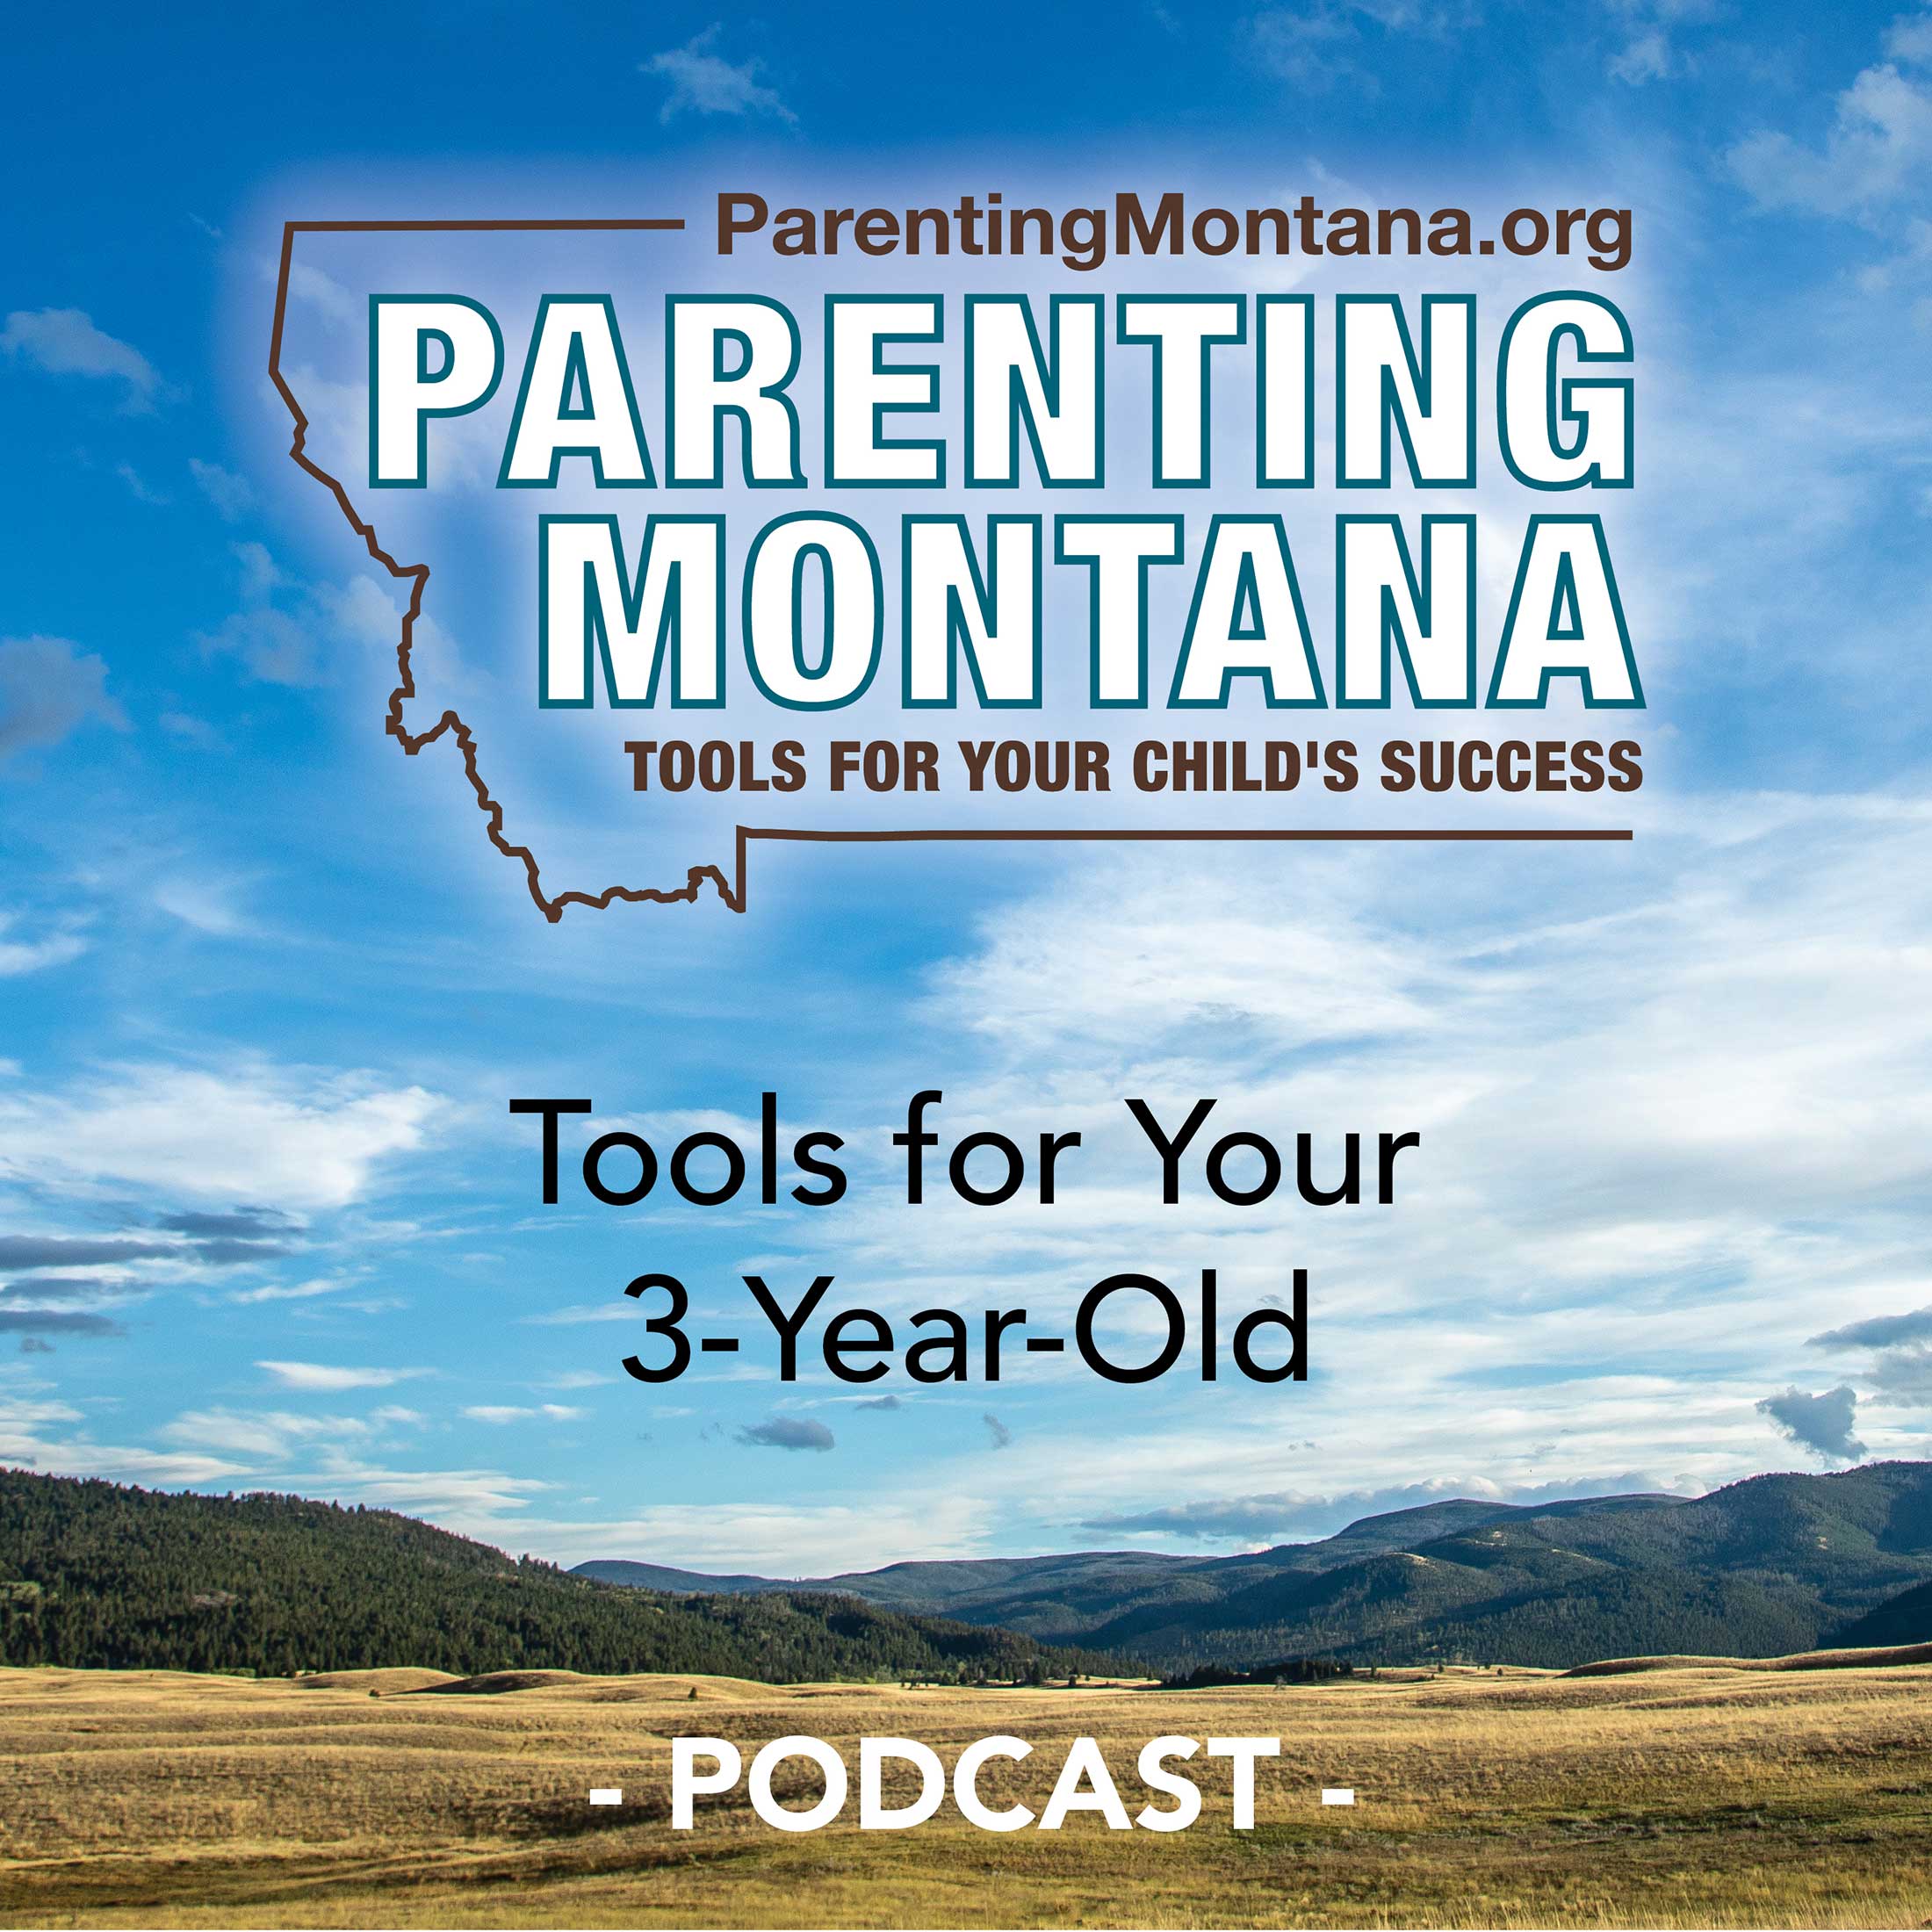 Artwork for podcast 3-Year-Old Parenting Montana Tools